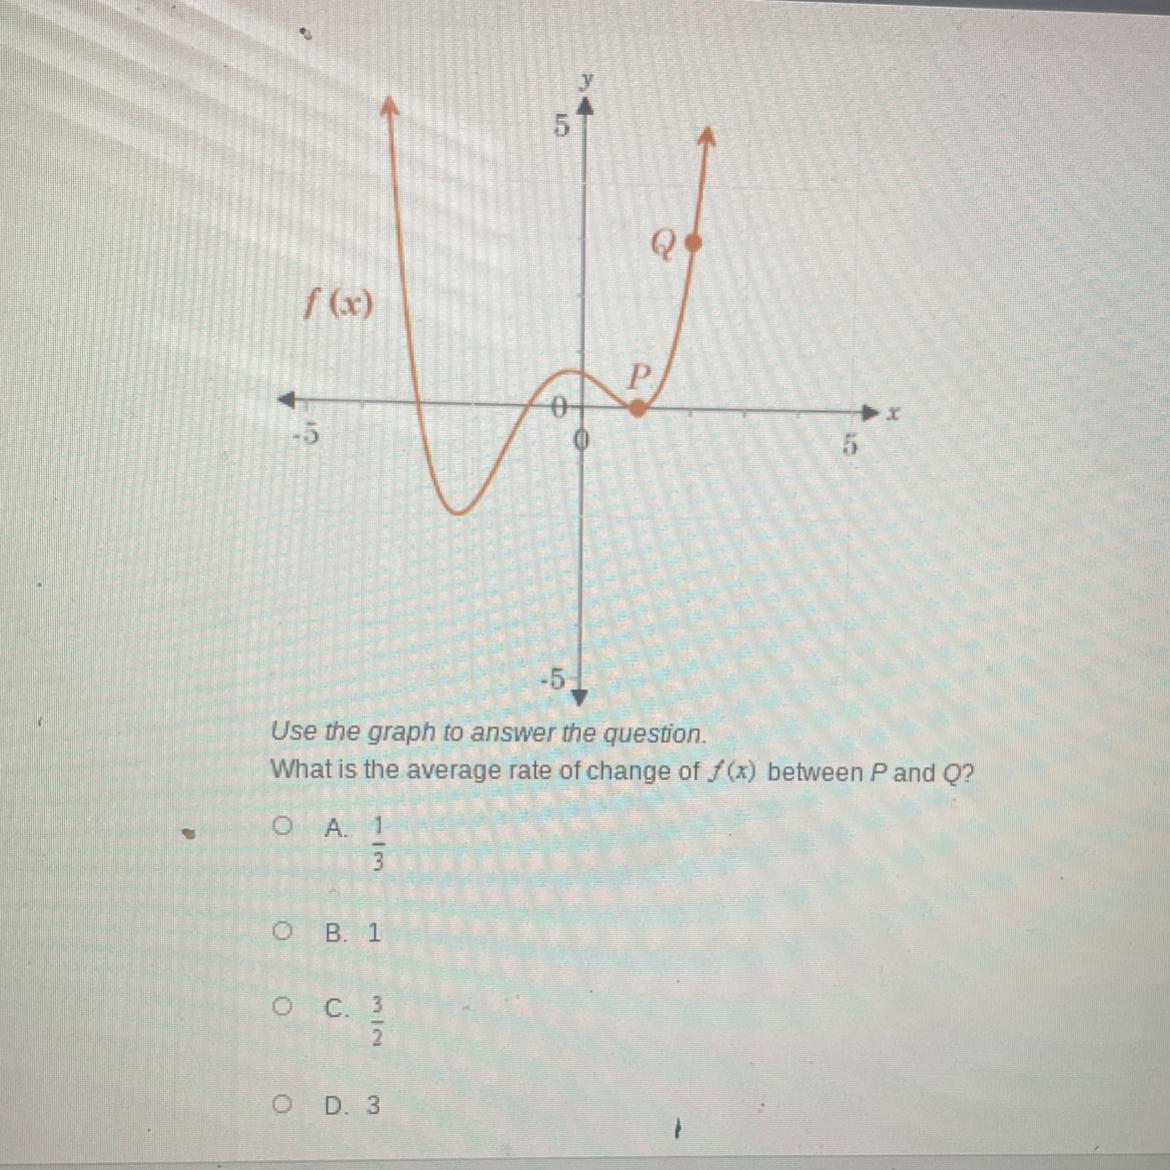 Use The Graph To Answer The QuestionWhat Is The Average Rate Of Change Of F(x) Between P And Q?